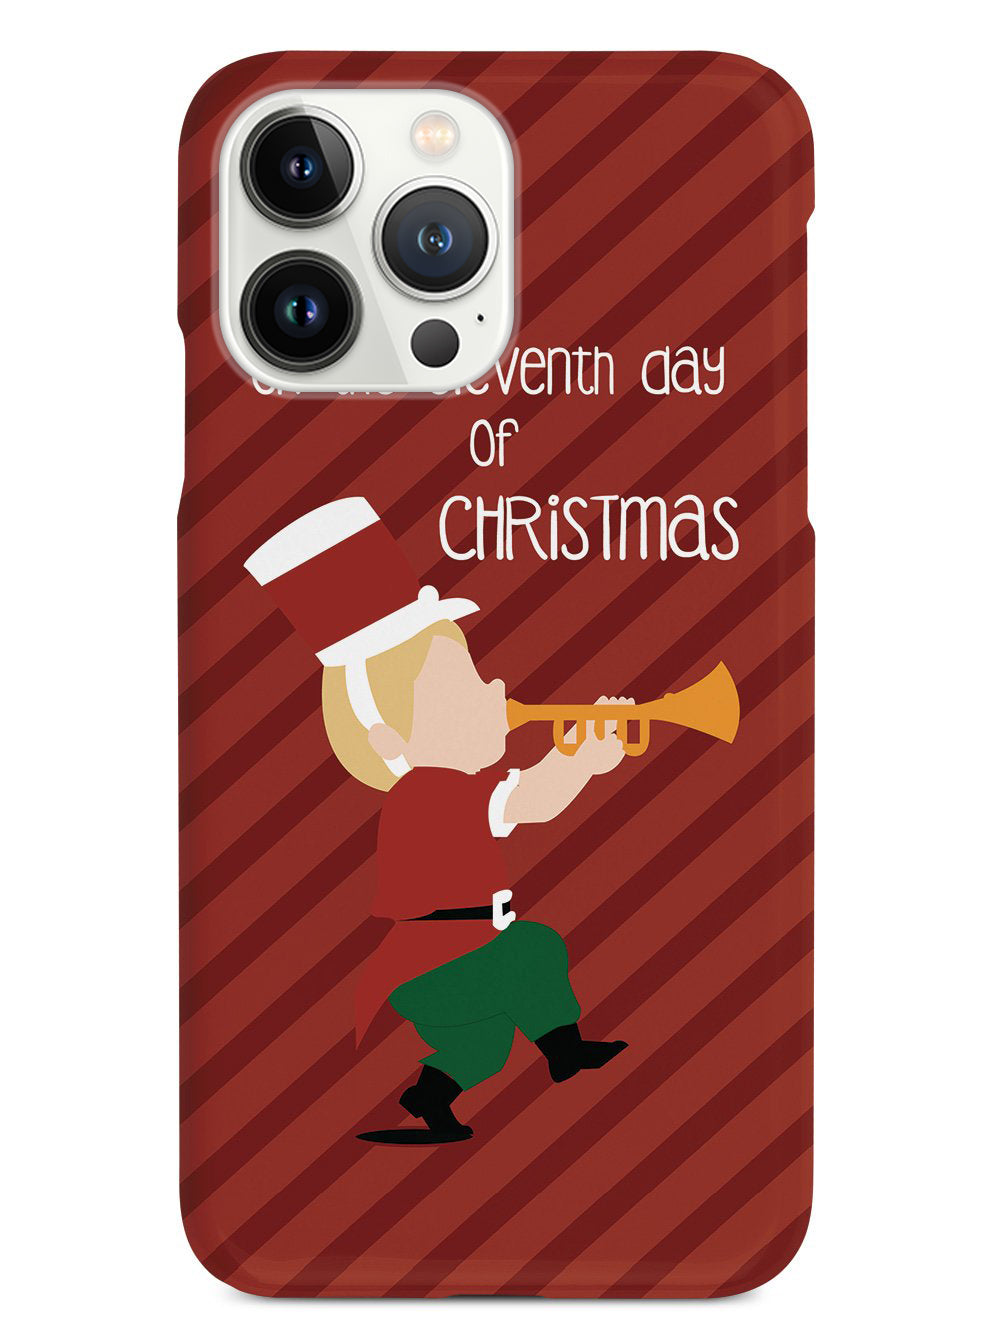 On the Eleventh Day of Christmas - Eleven Pipers Piping Case